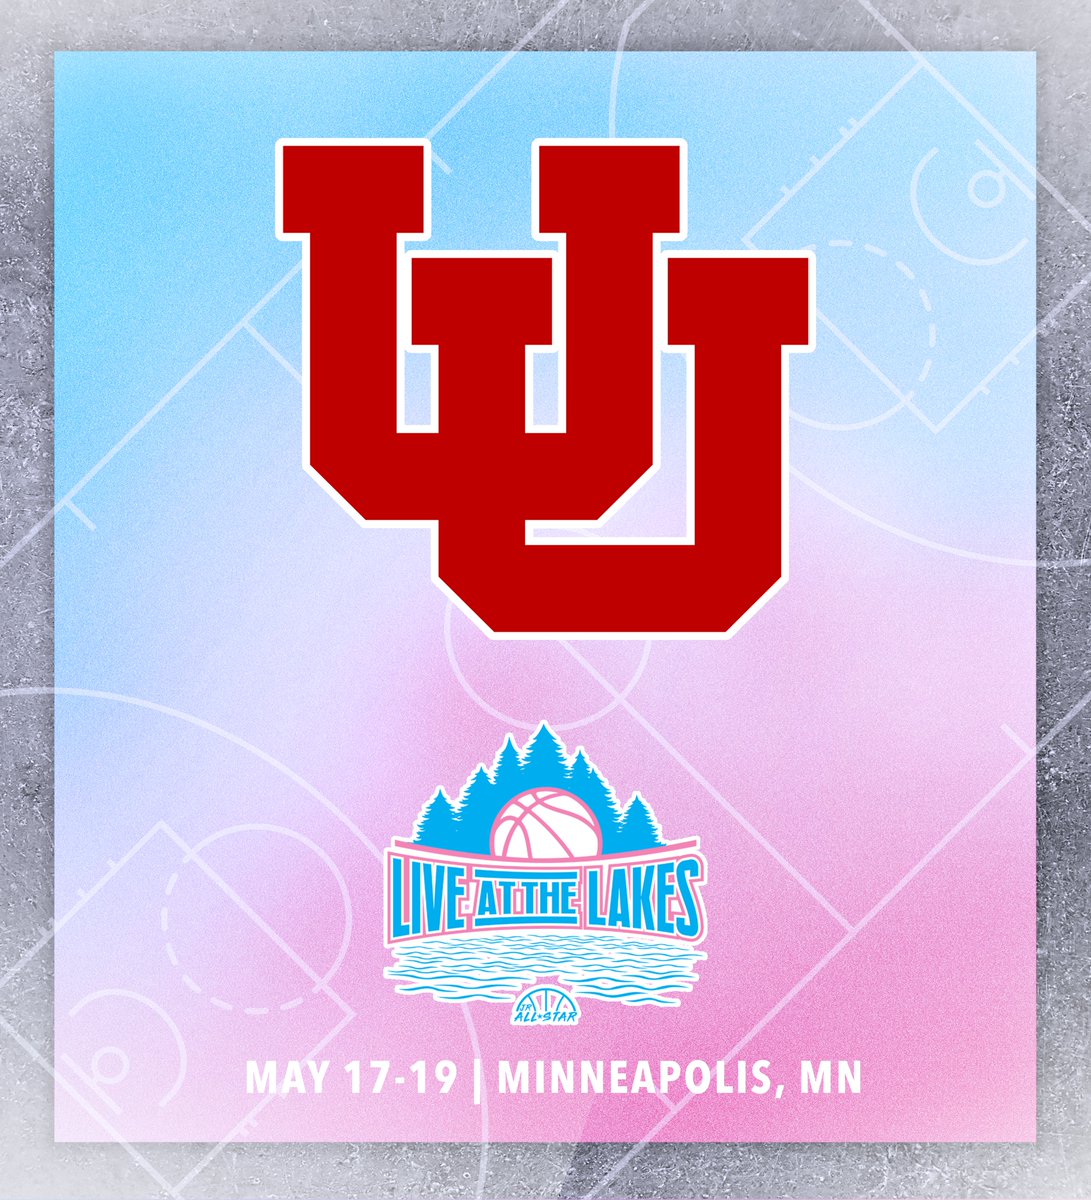 The University of Utah (@UTAHWBB) registered to attend 𝗟𝗜𝗩𝗘 𝗔𝗧 𝗧𝗛𝗘 𝗟𝗔𝗞𝗘𝗦 during the May Viewing Period! Secure your spot to watch 100+ teams bring the heat. 🔥 jrallstar.com/exposure-event…